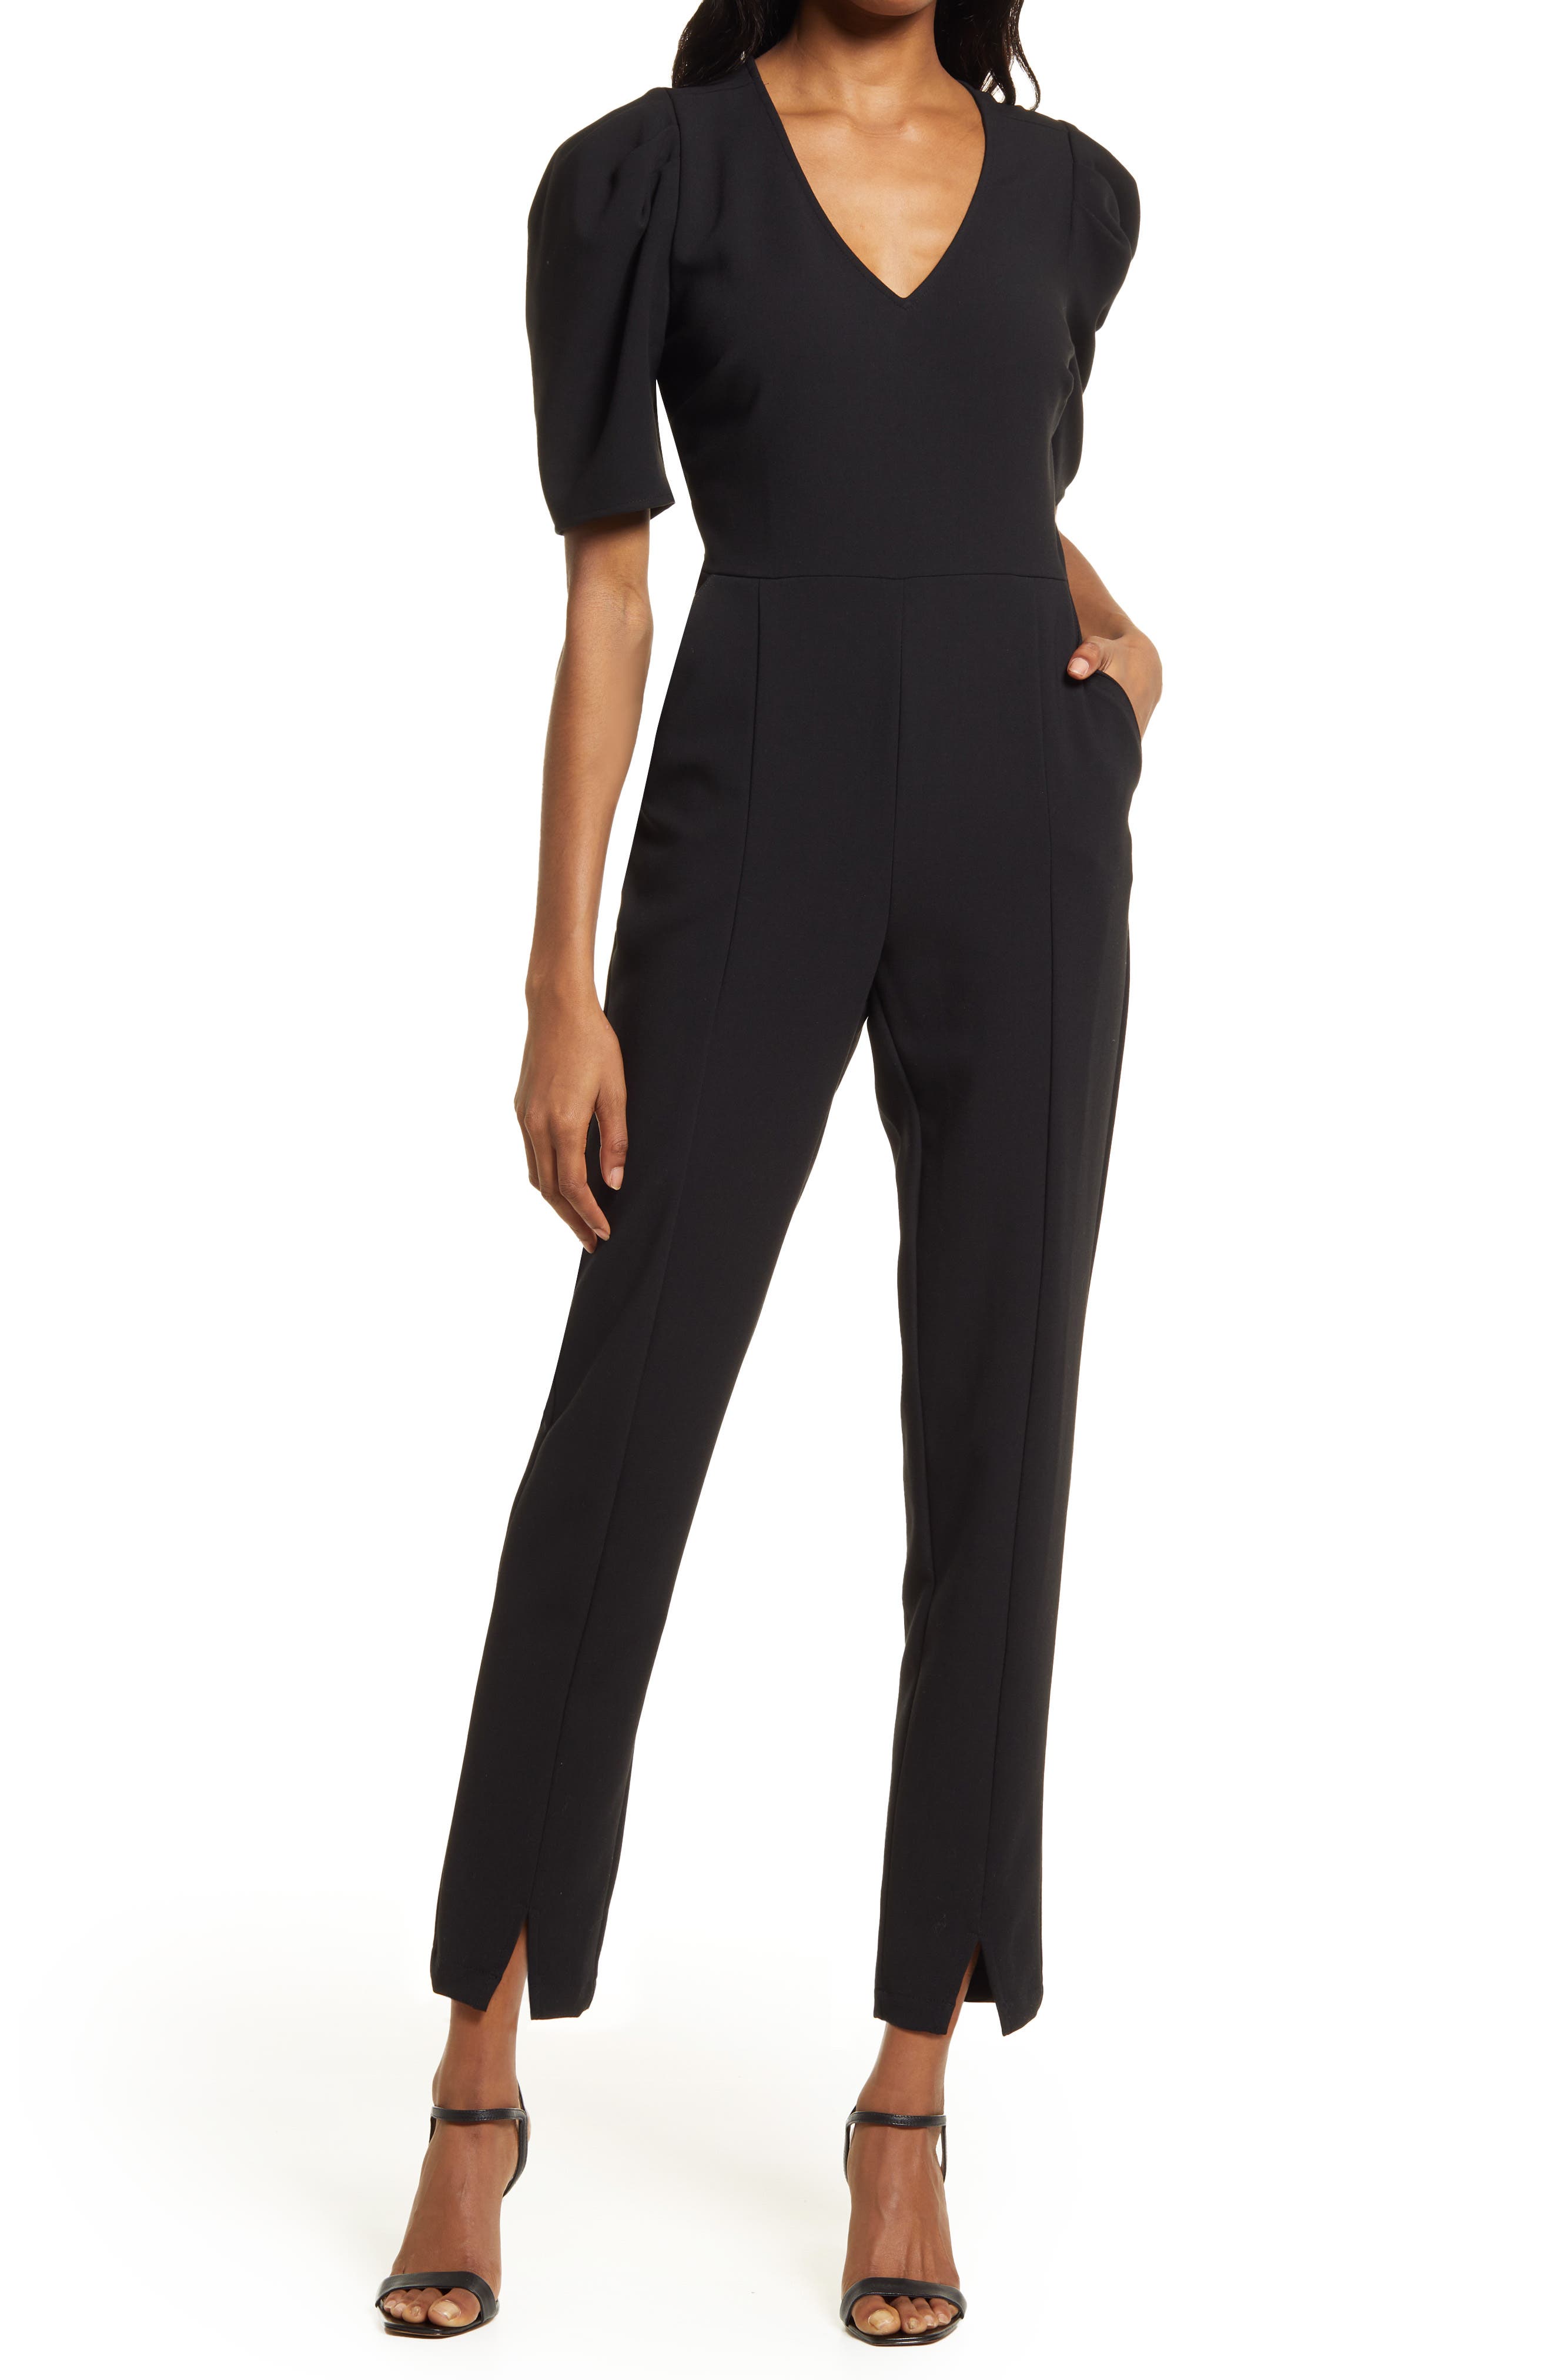 Black Jumpsuits ☀ Rompers for Women ...